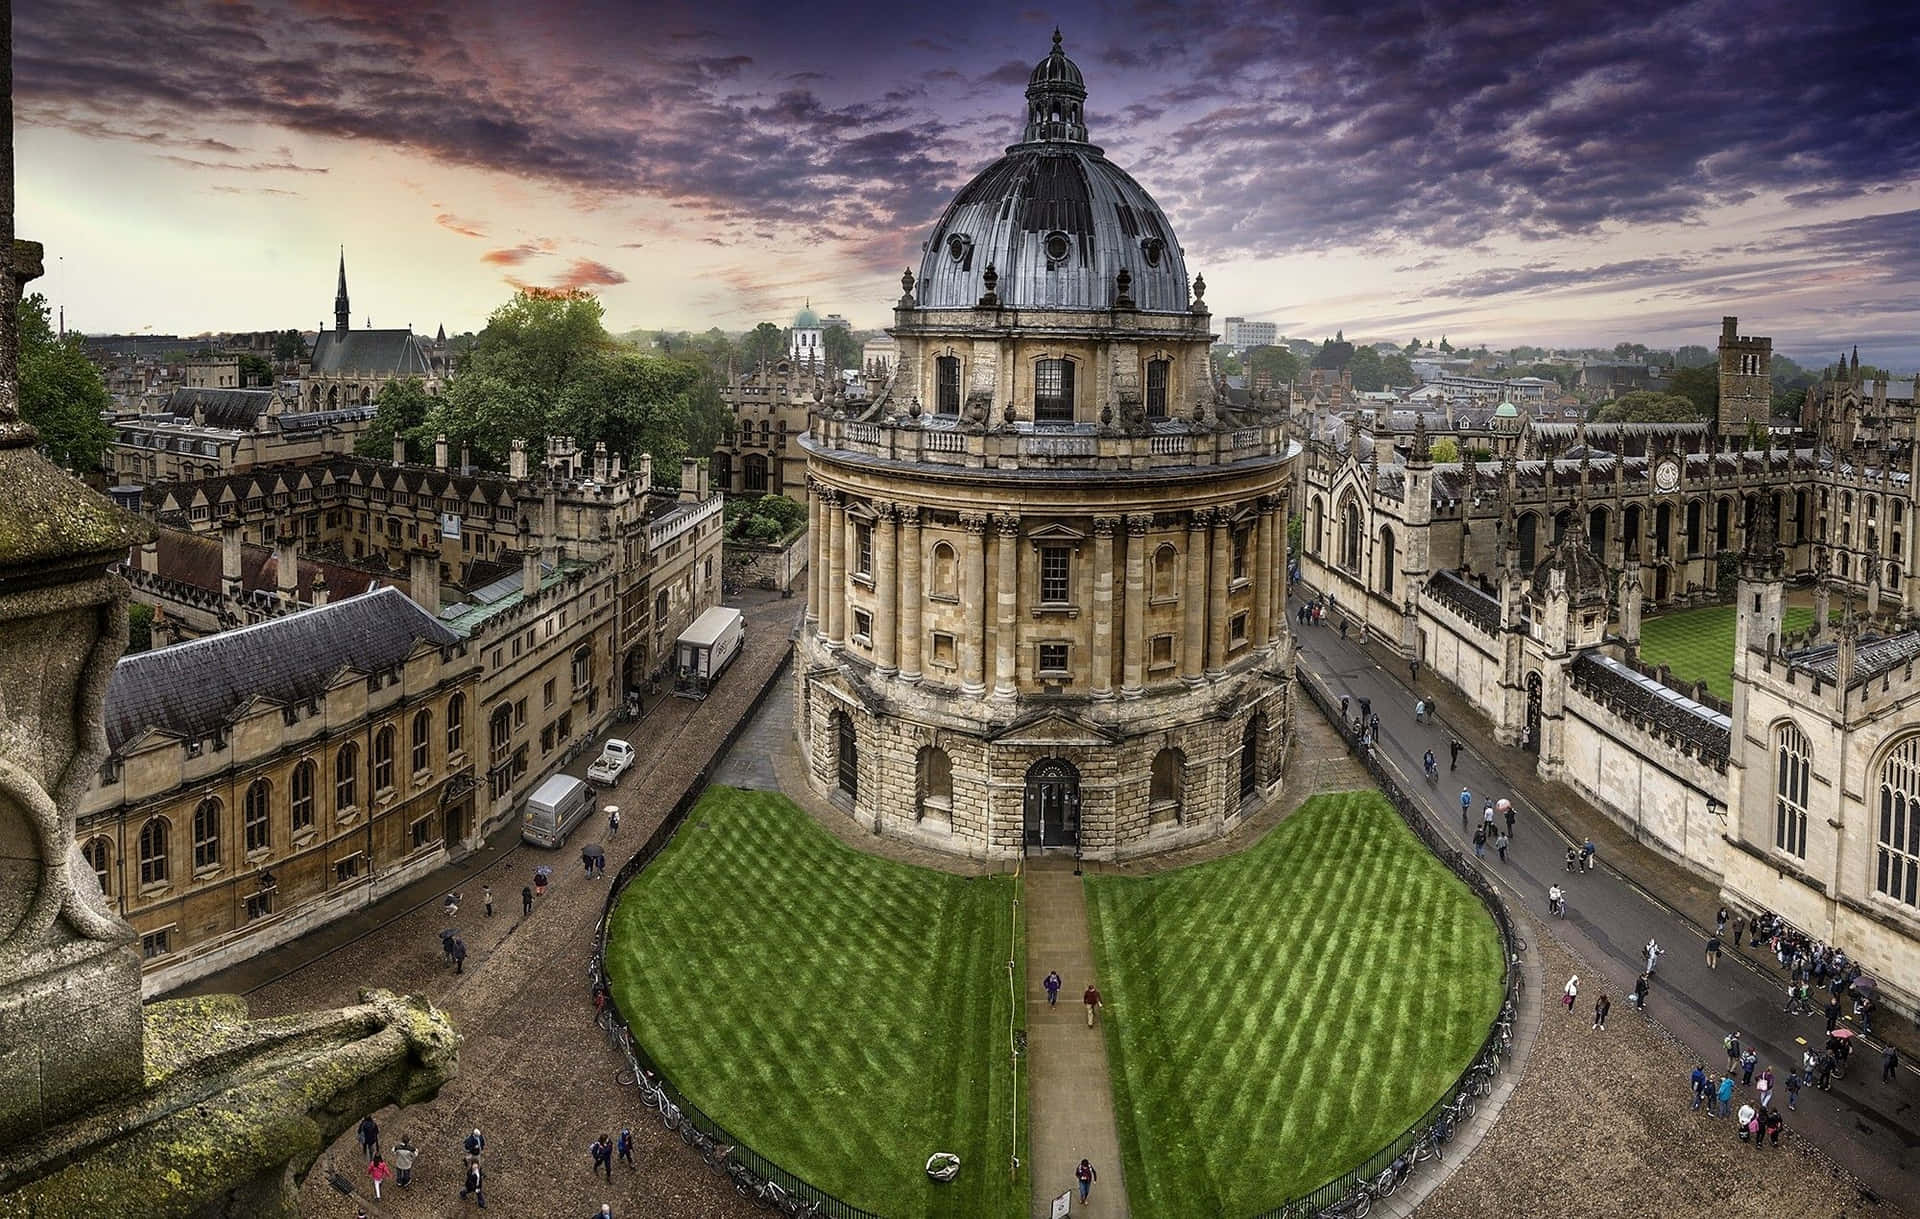 Oxford University Radcliffe Camera Saturated Edited Wallpaper